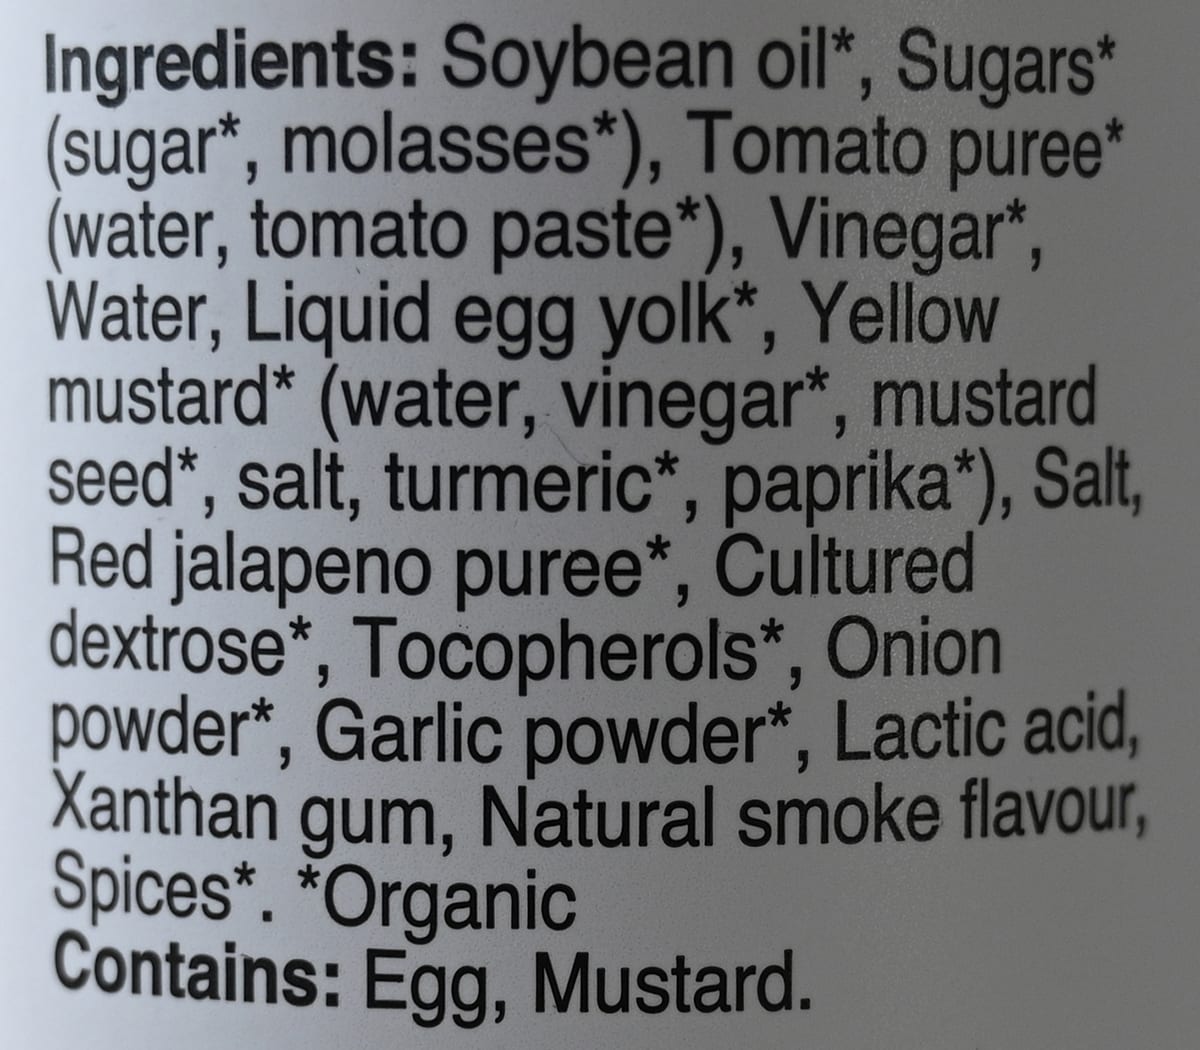 Image of the ingredients for the sauce from the back of the container.